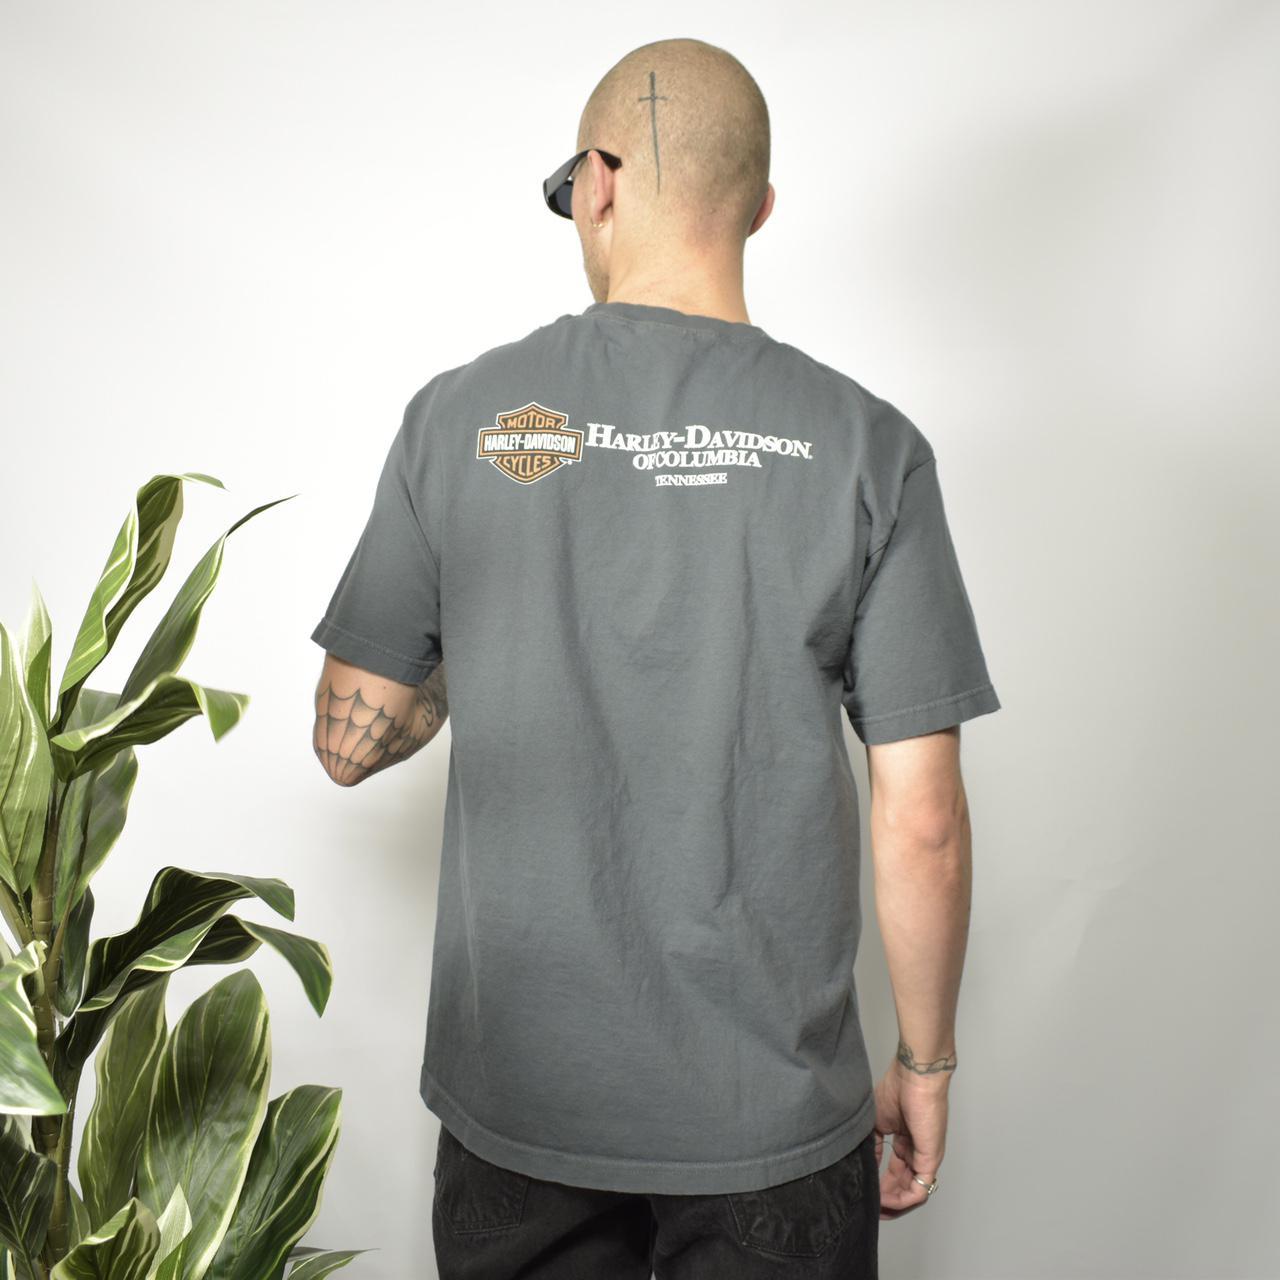 Product Image 3 - Harley Davidson Tee

Tagged: L

Measurements: 
Chest